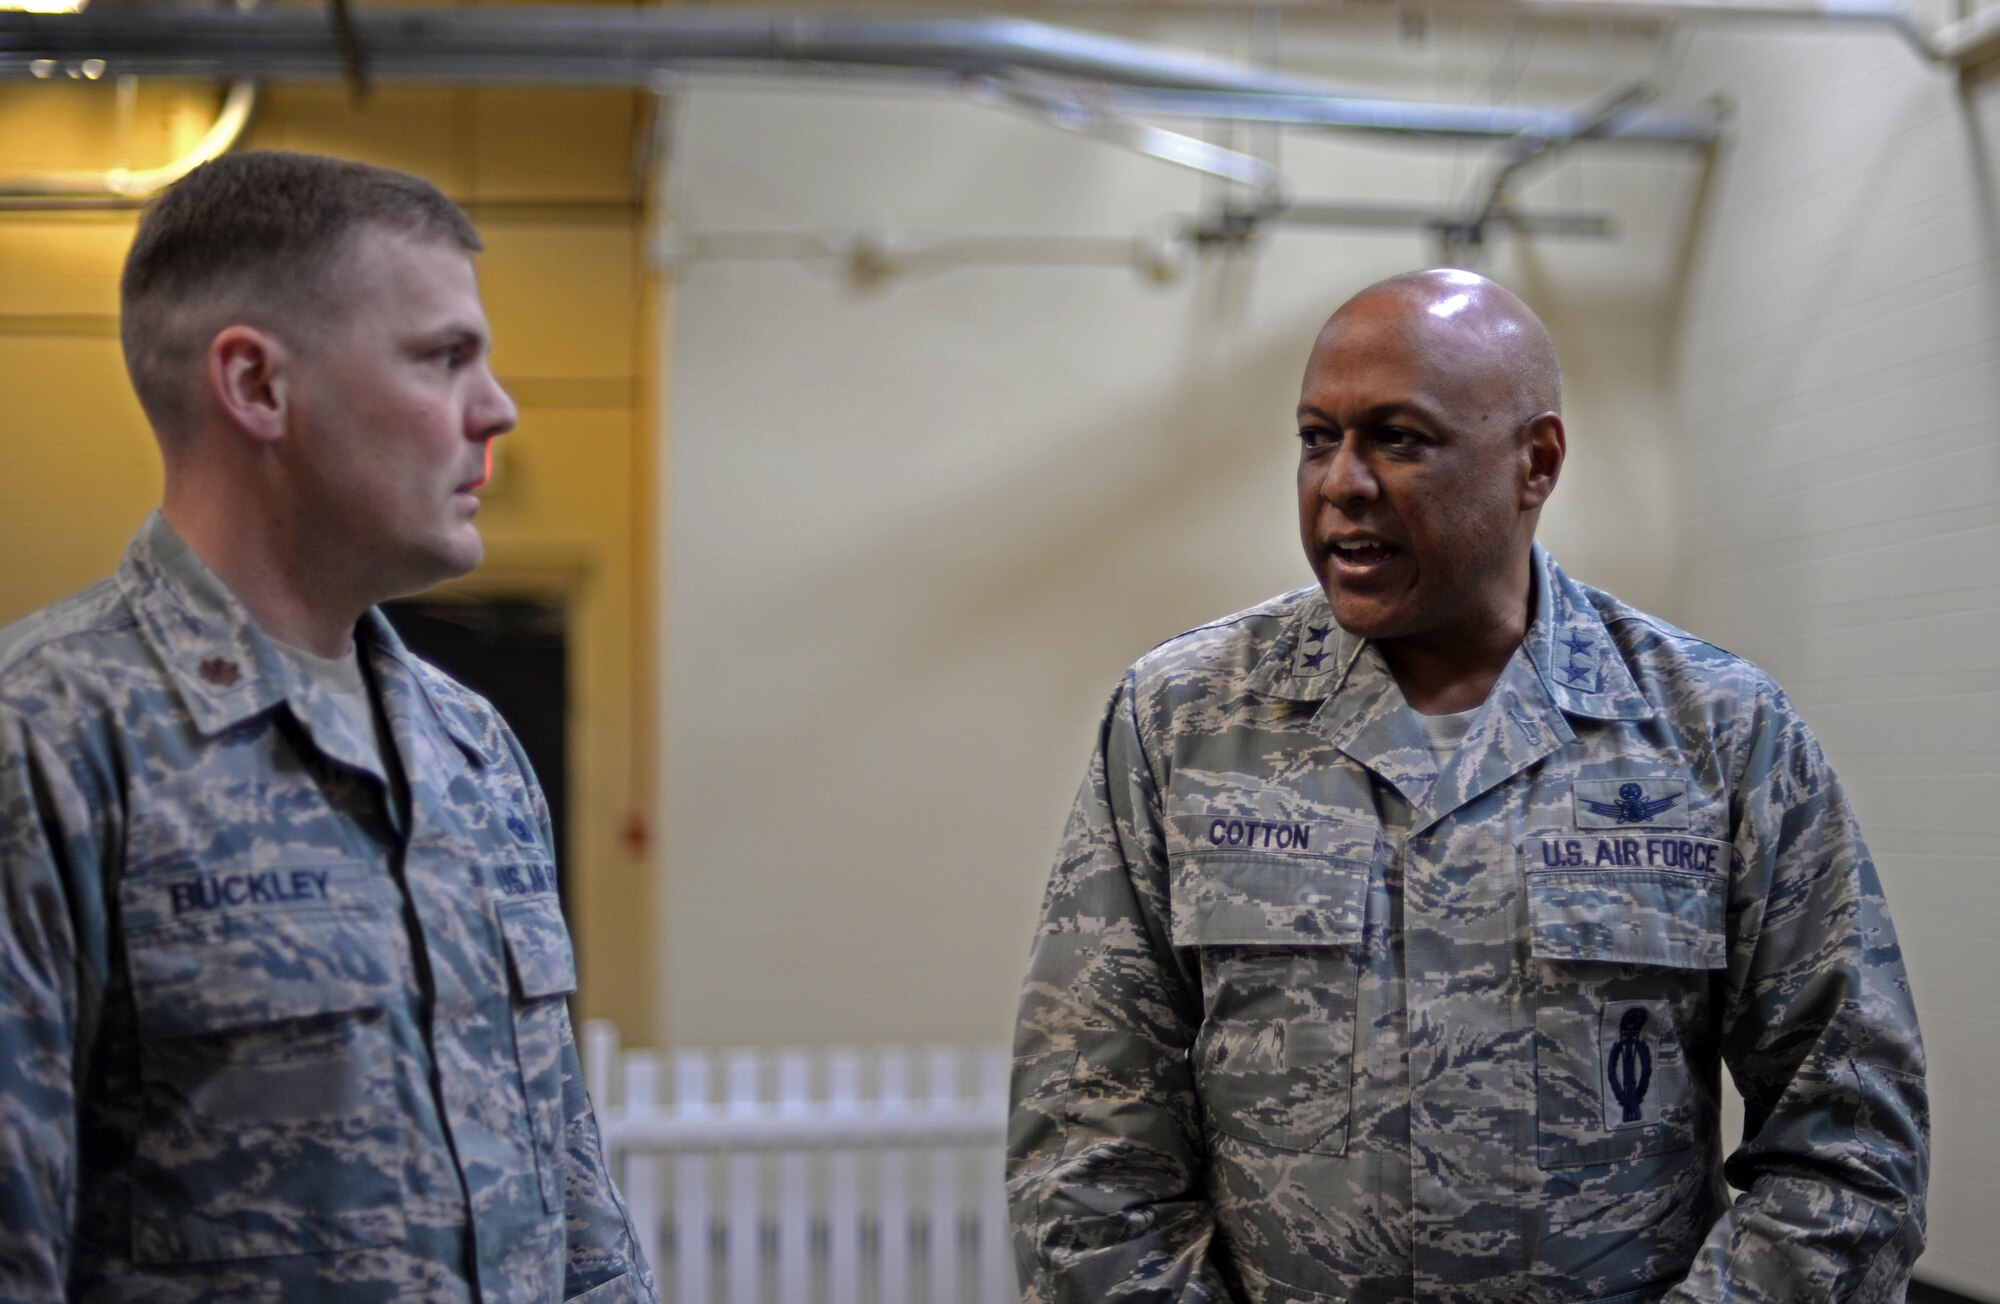 Maj. Gen. Anthony Cotton, 20th Air Force commander, speaks with Major Richard Buckley, 5th Security Forces Squadron deputy commander, at Minot Air Force Base, N.D., April 28, 2017. Cotton took command of the 20th Air Force and Task Force 214 Nov. 16, 2015. (U.S. Air Force photo/Airman 1st Class Austin M. Thomas)